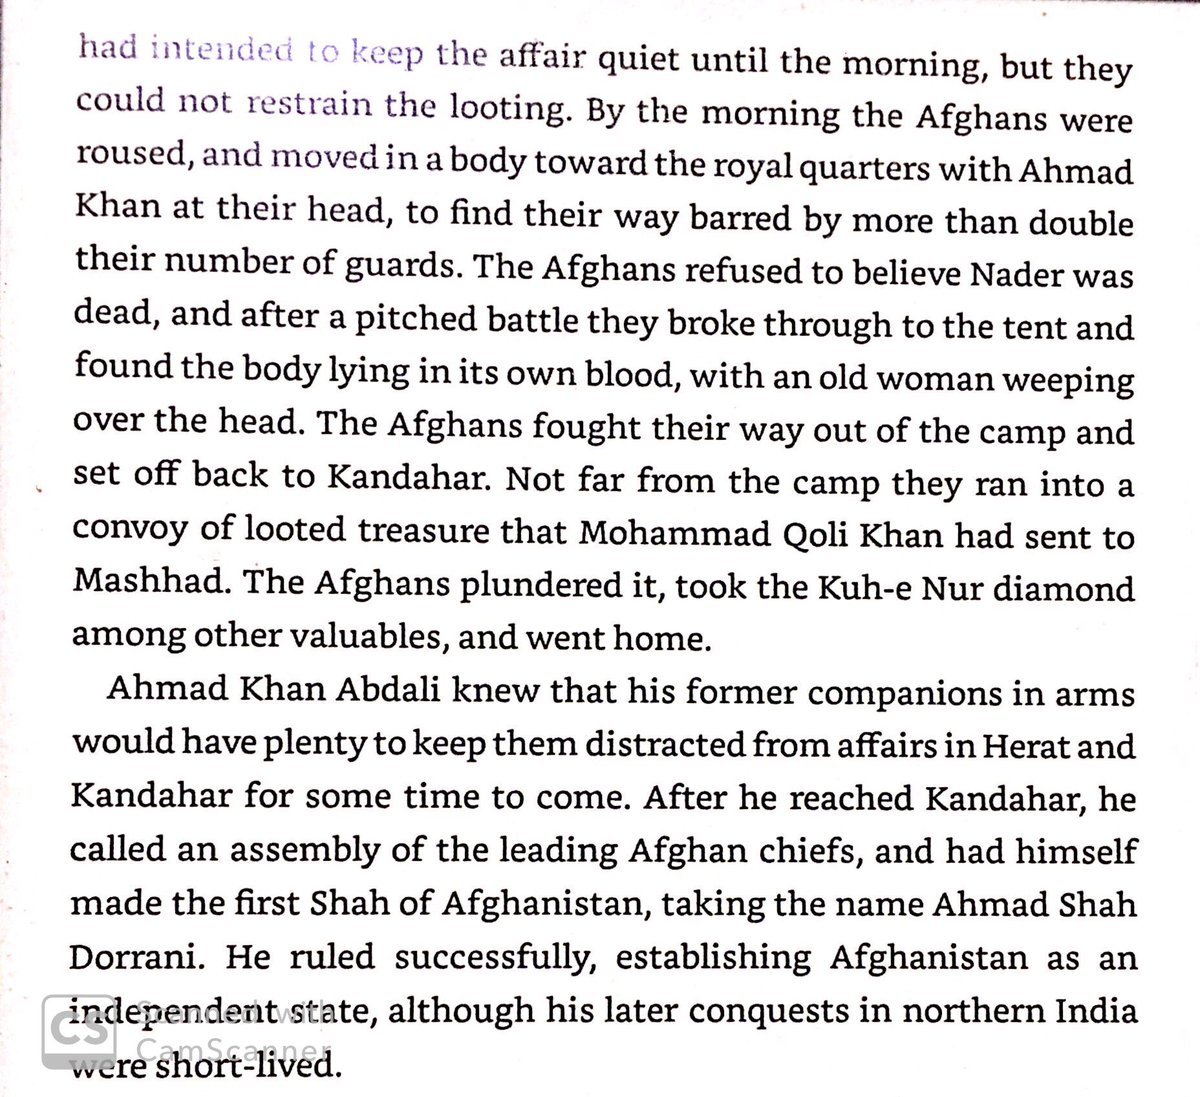 The early career of Ahmad Shah Durrani as a Persian soldier is mentioned in the book. No doubt he learned a lot from Nader & veterans of his wars.